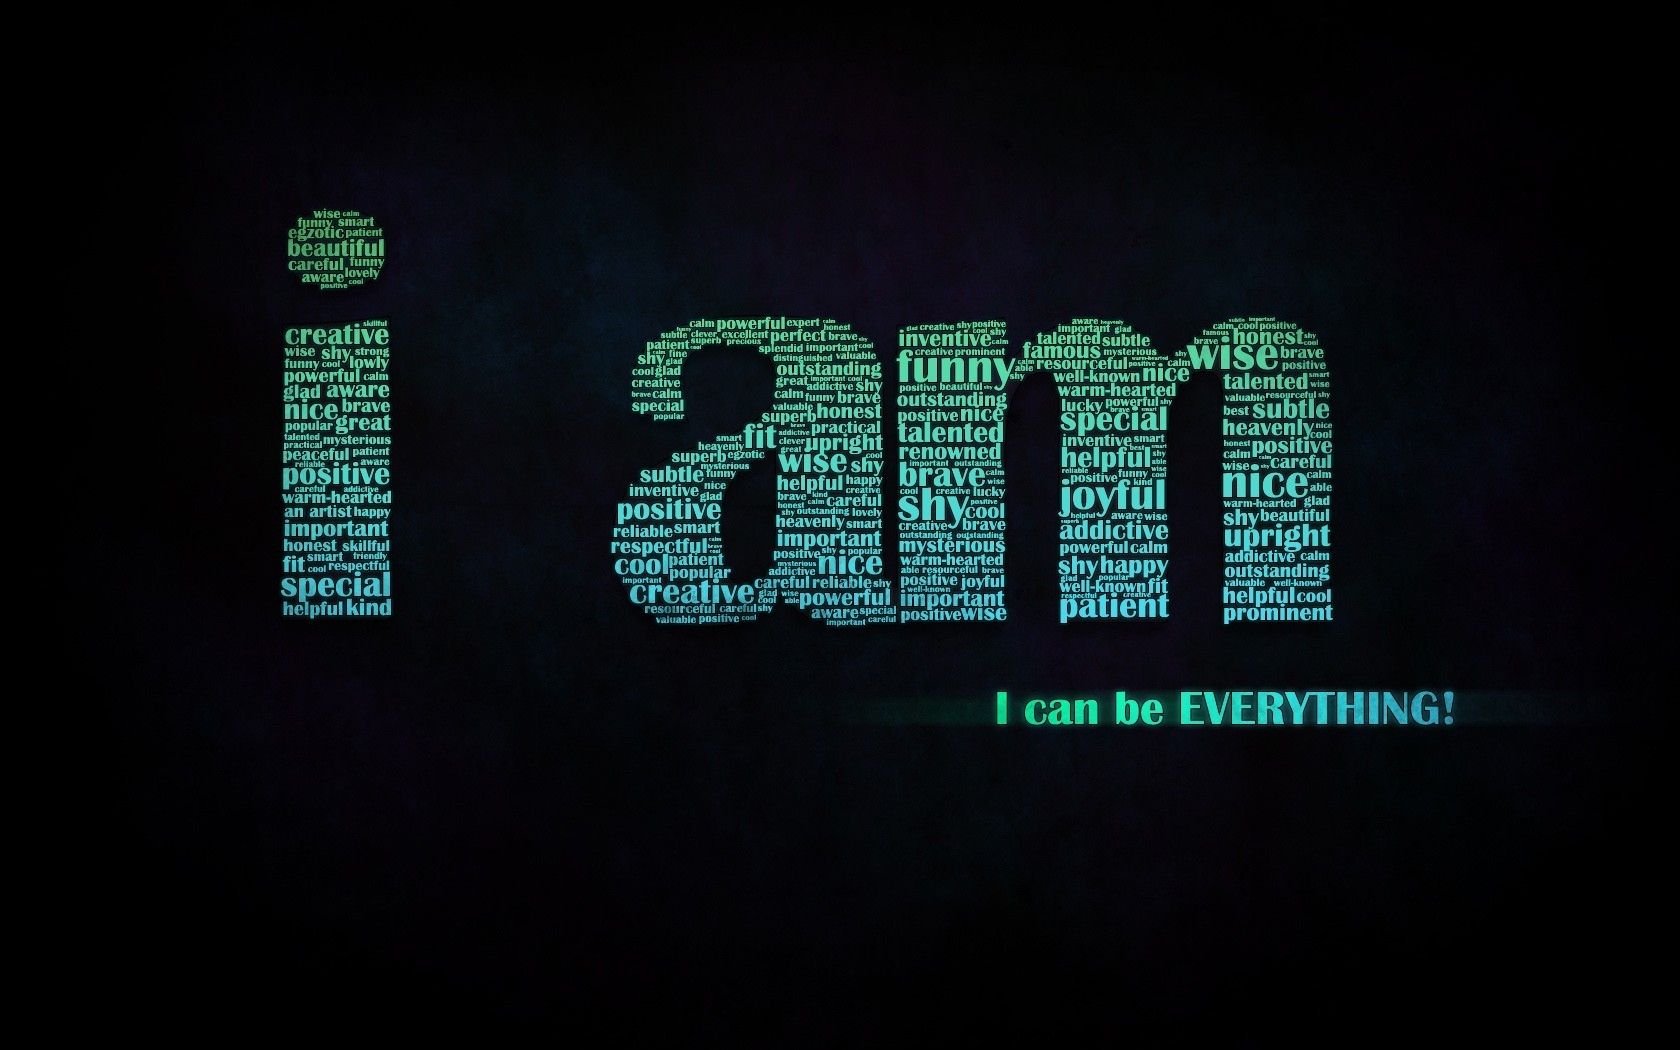 I Am Single Wallpapers